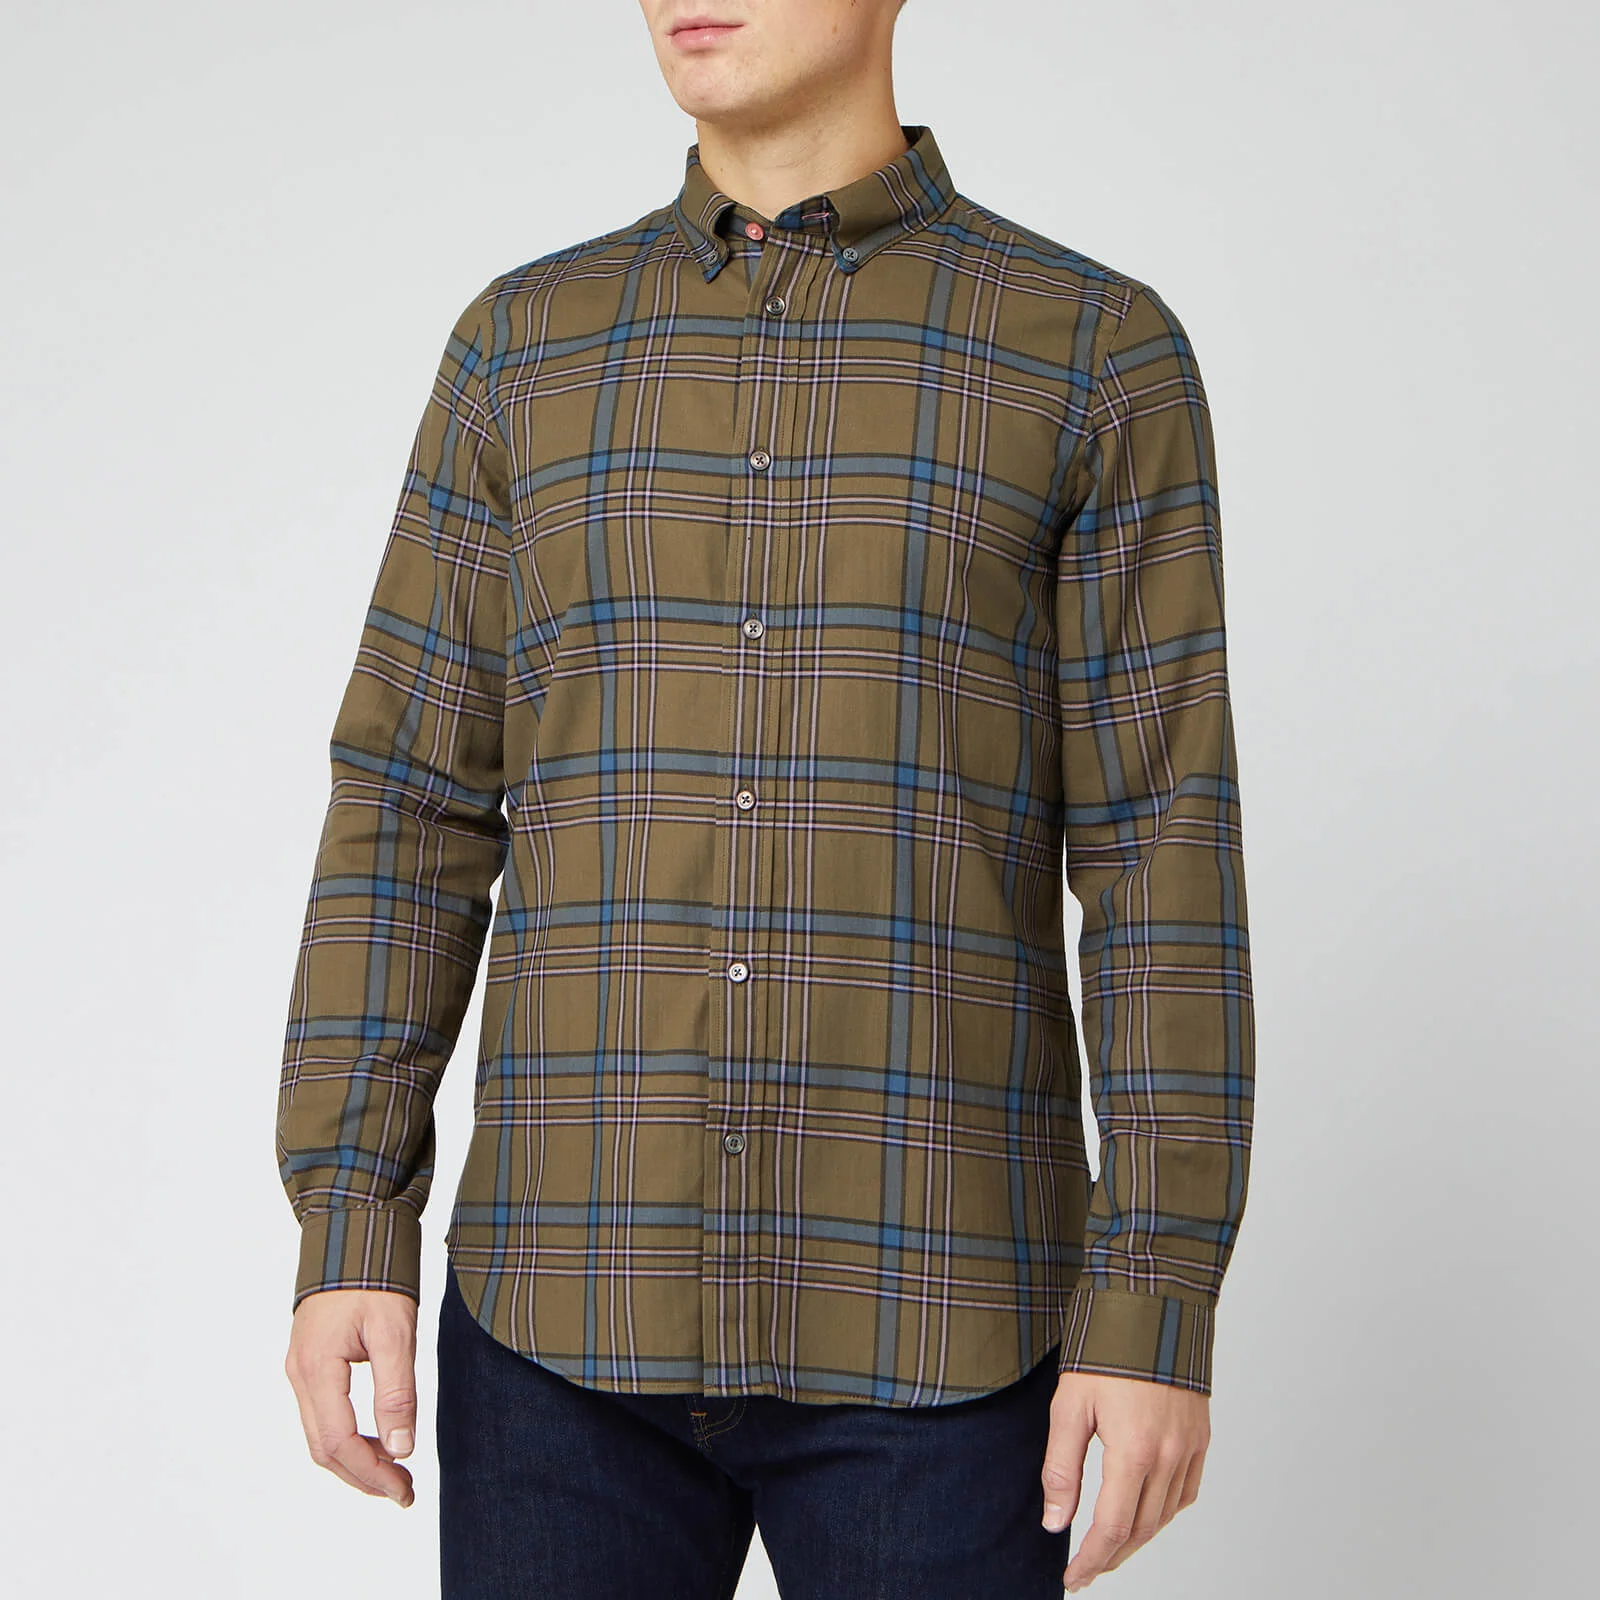 PS Paul Smith Men's Brushed Cotton Check Shirt - Green Image 1